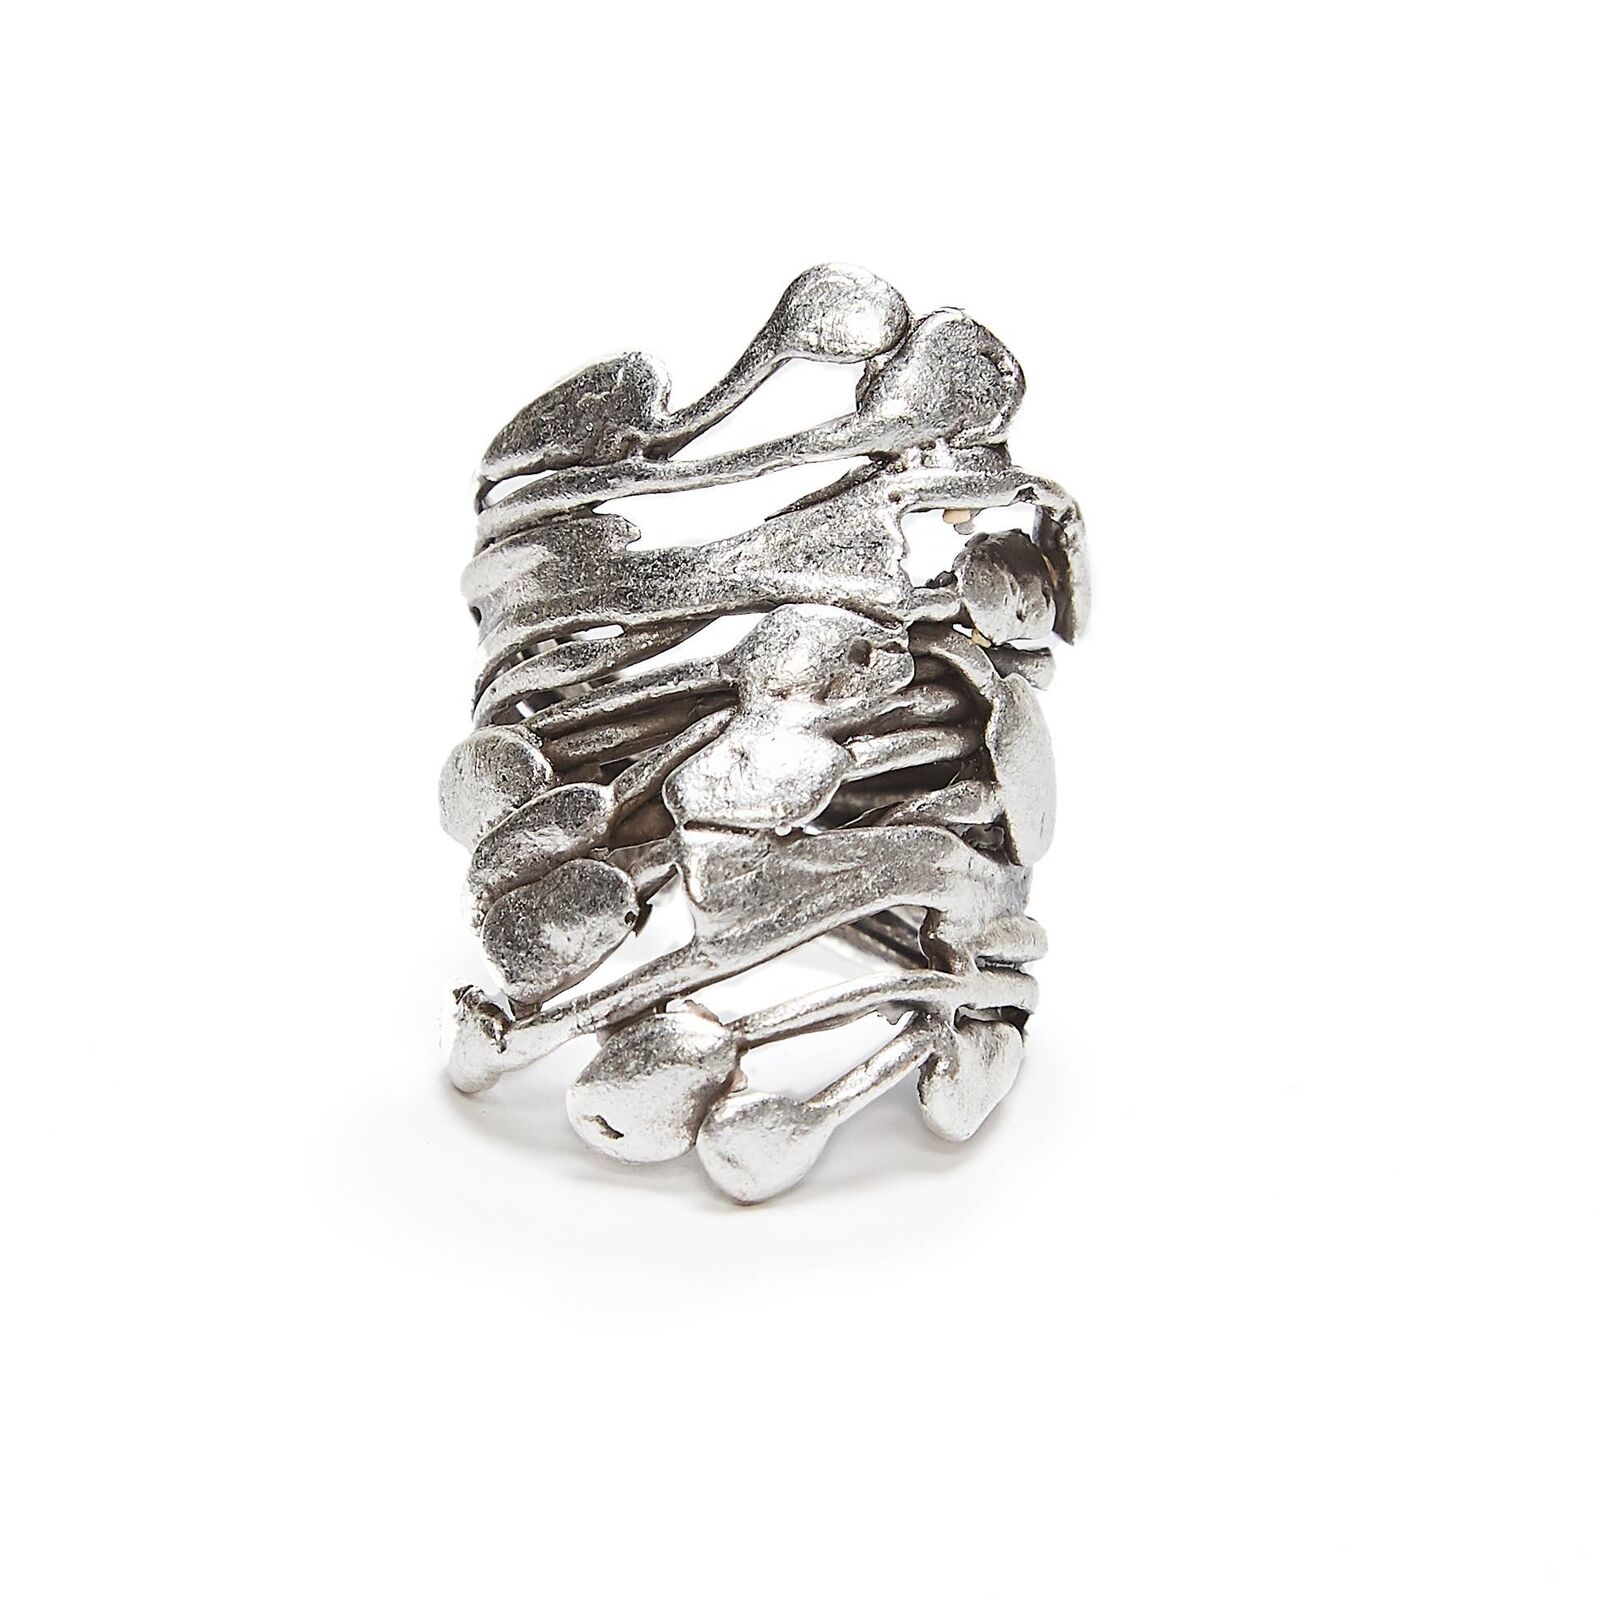 Handmade Silver Plated Ring